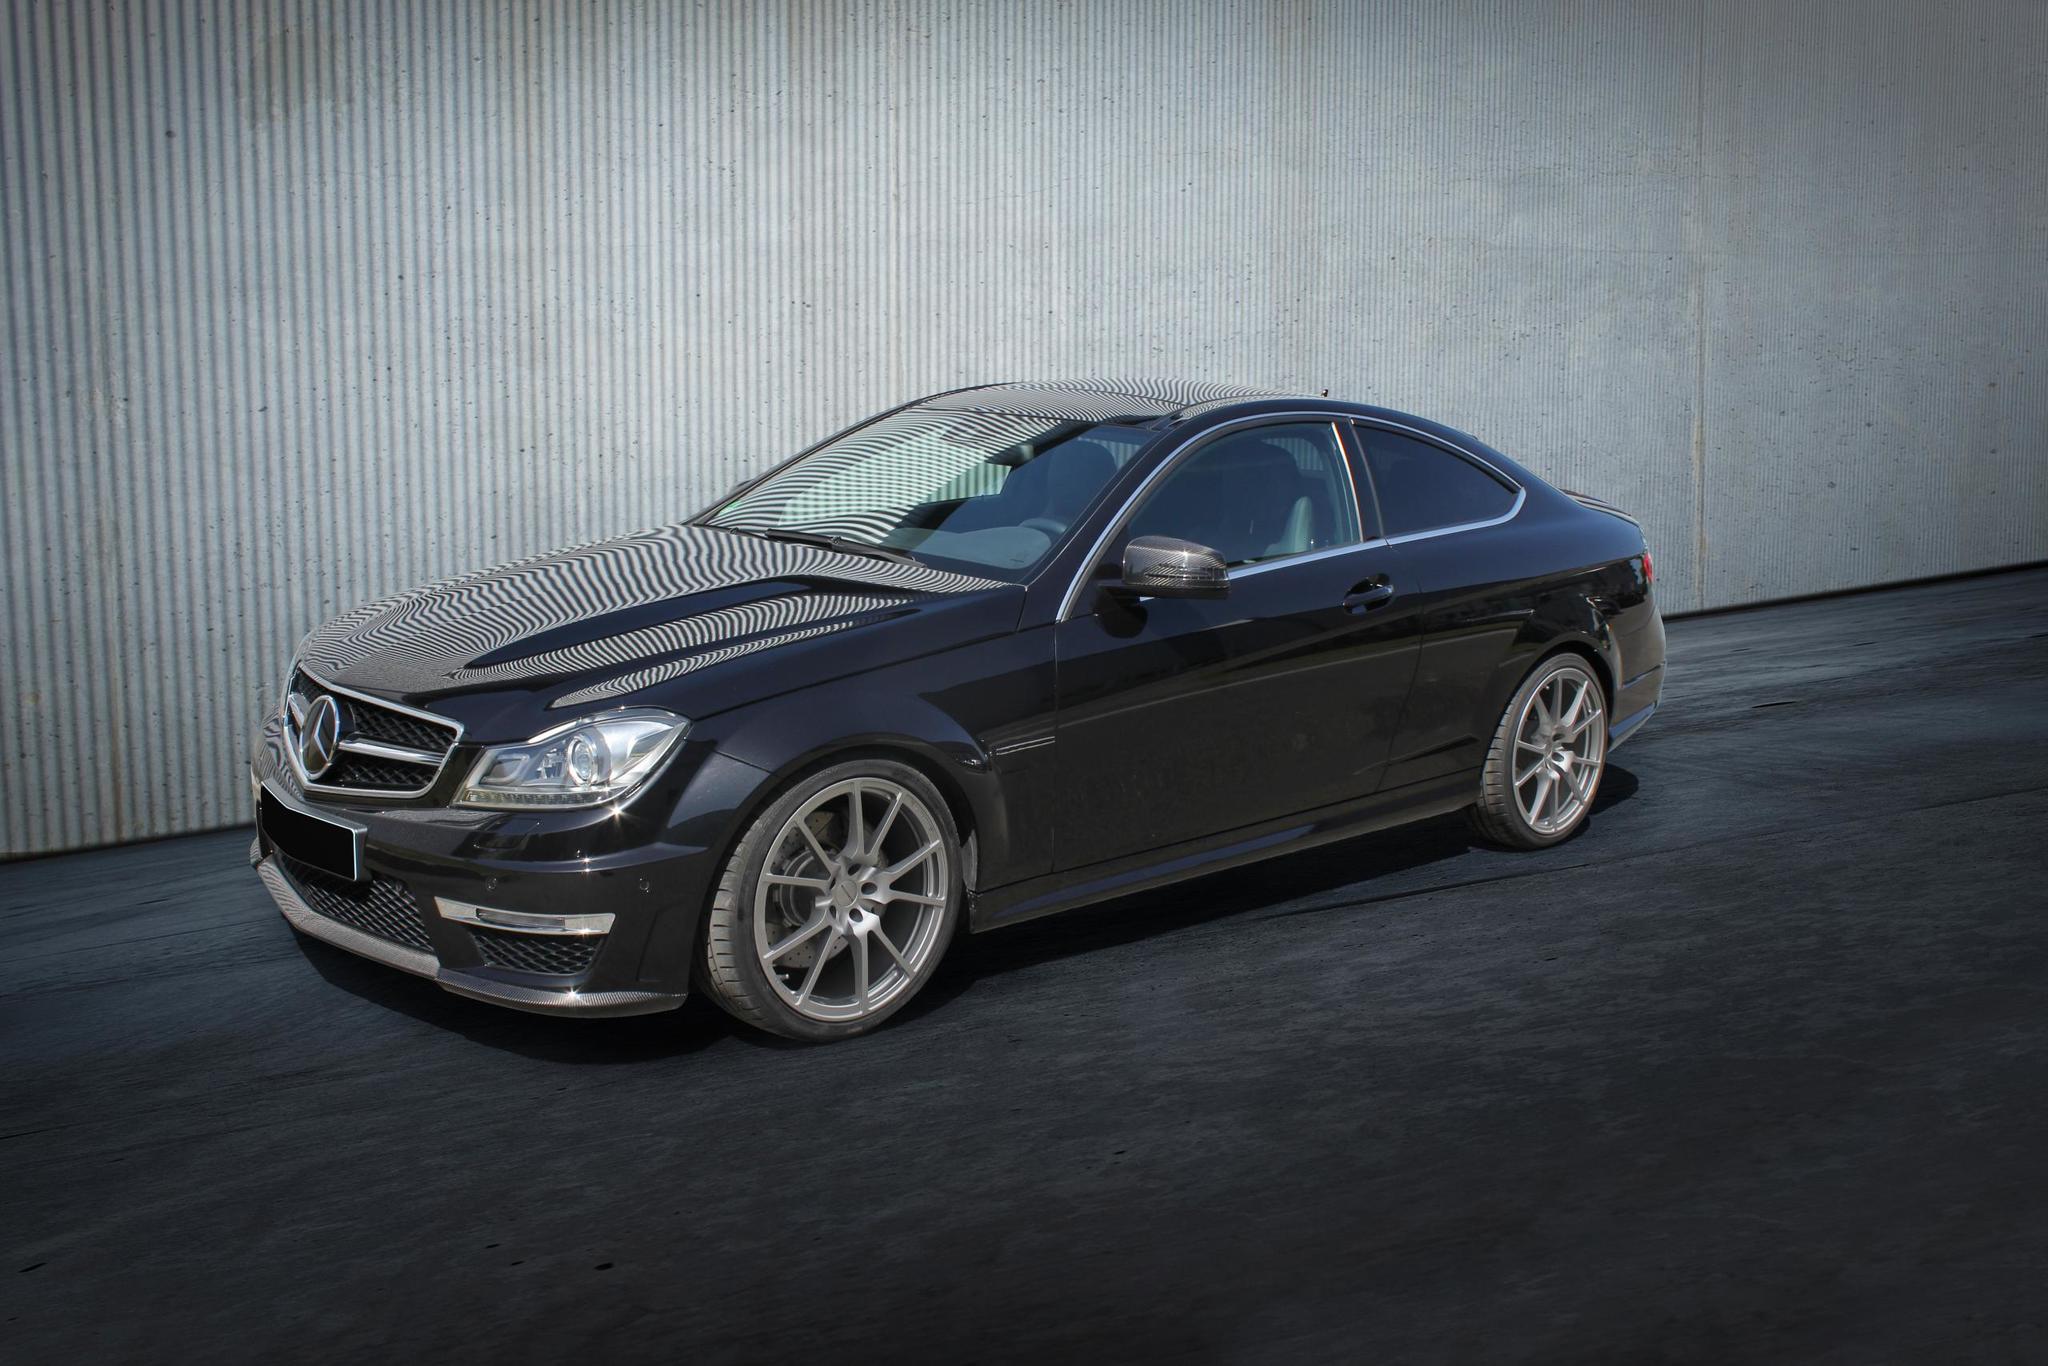 Mansory body kit for Mercedes-Benz C-class  new style